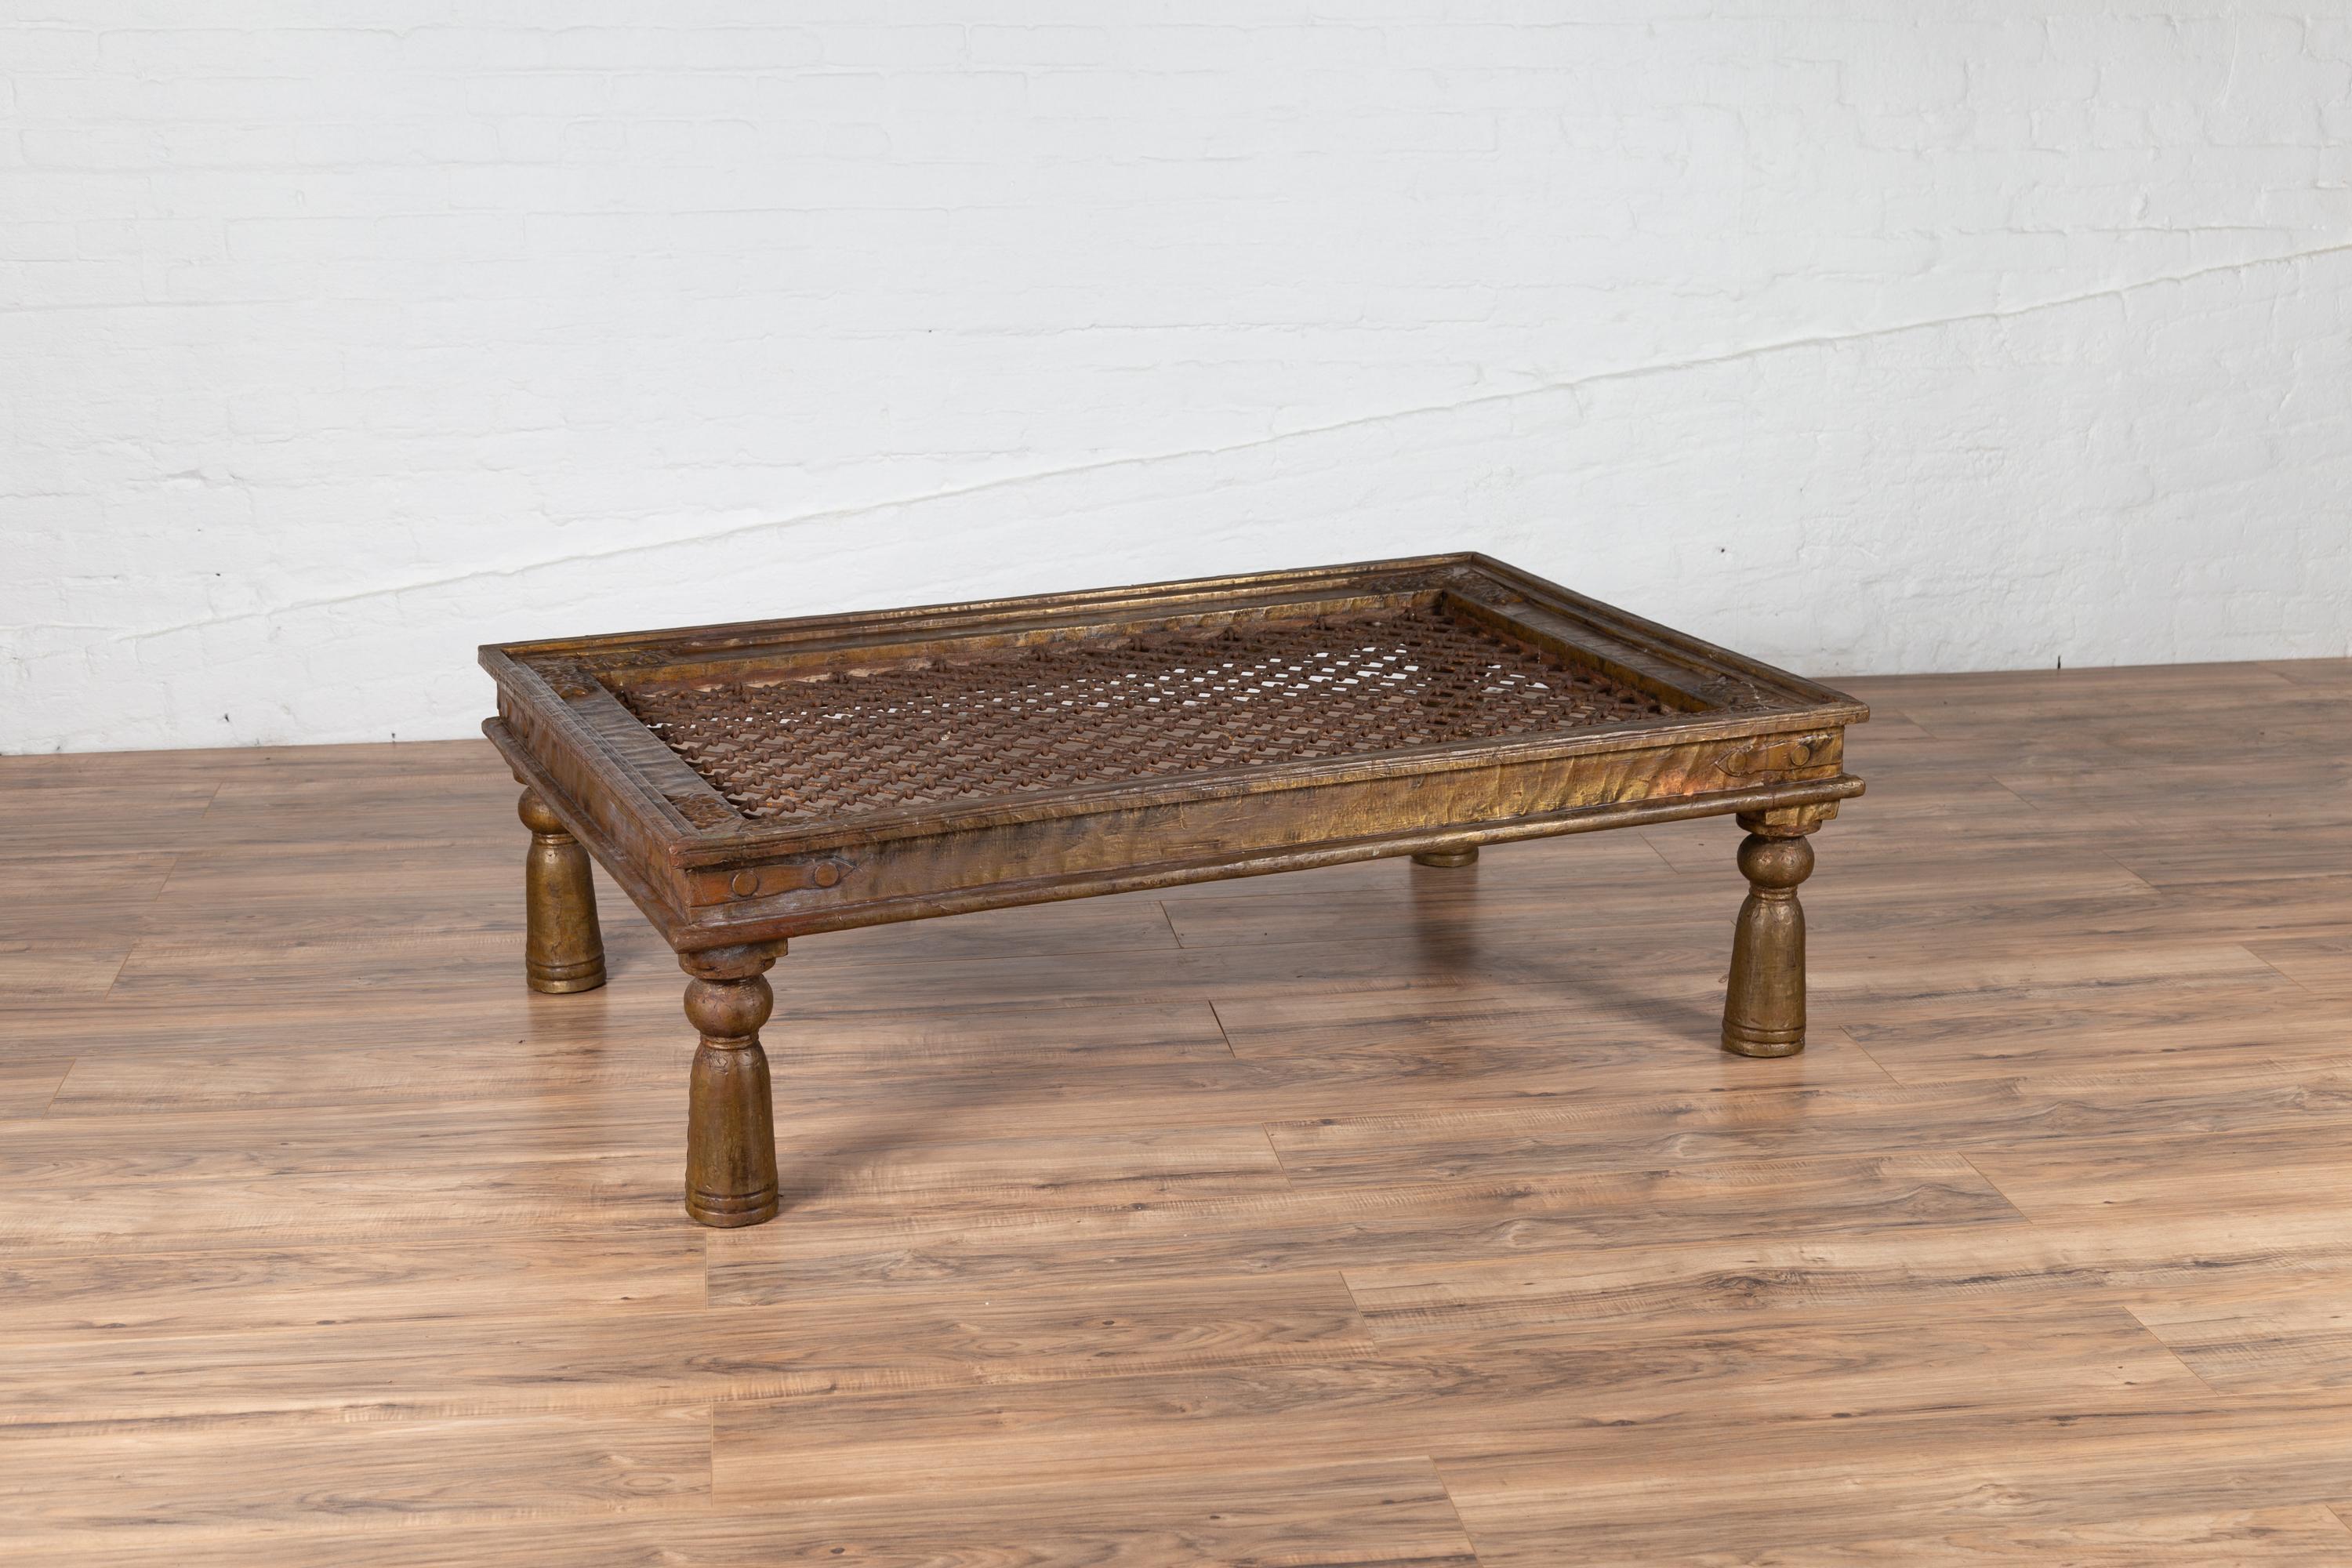 Antique Indian Window Grate Made into a Coffee Table with Copper Sheathing 3